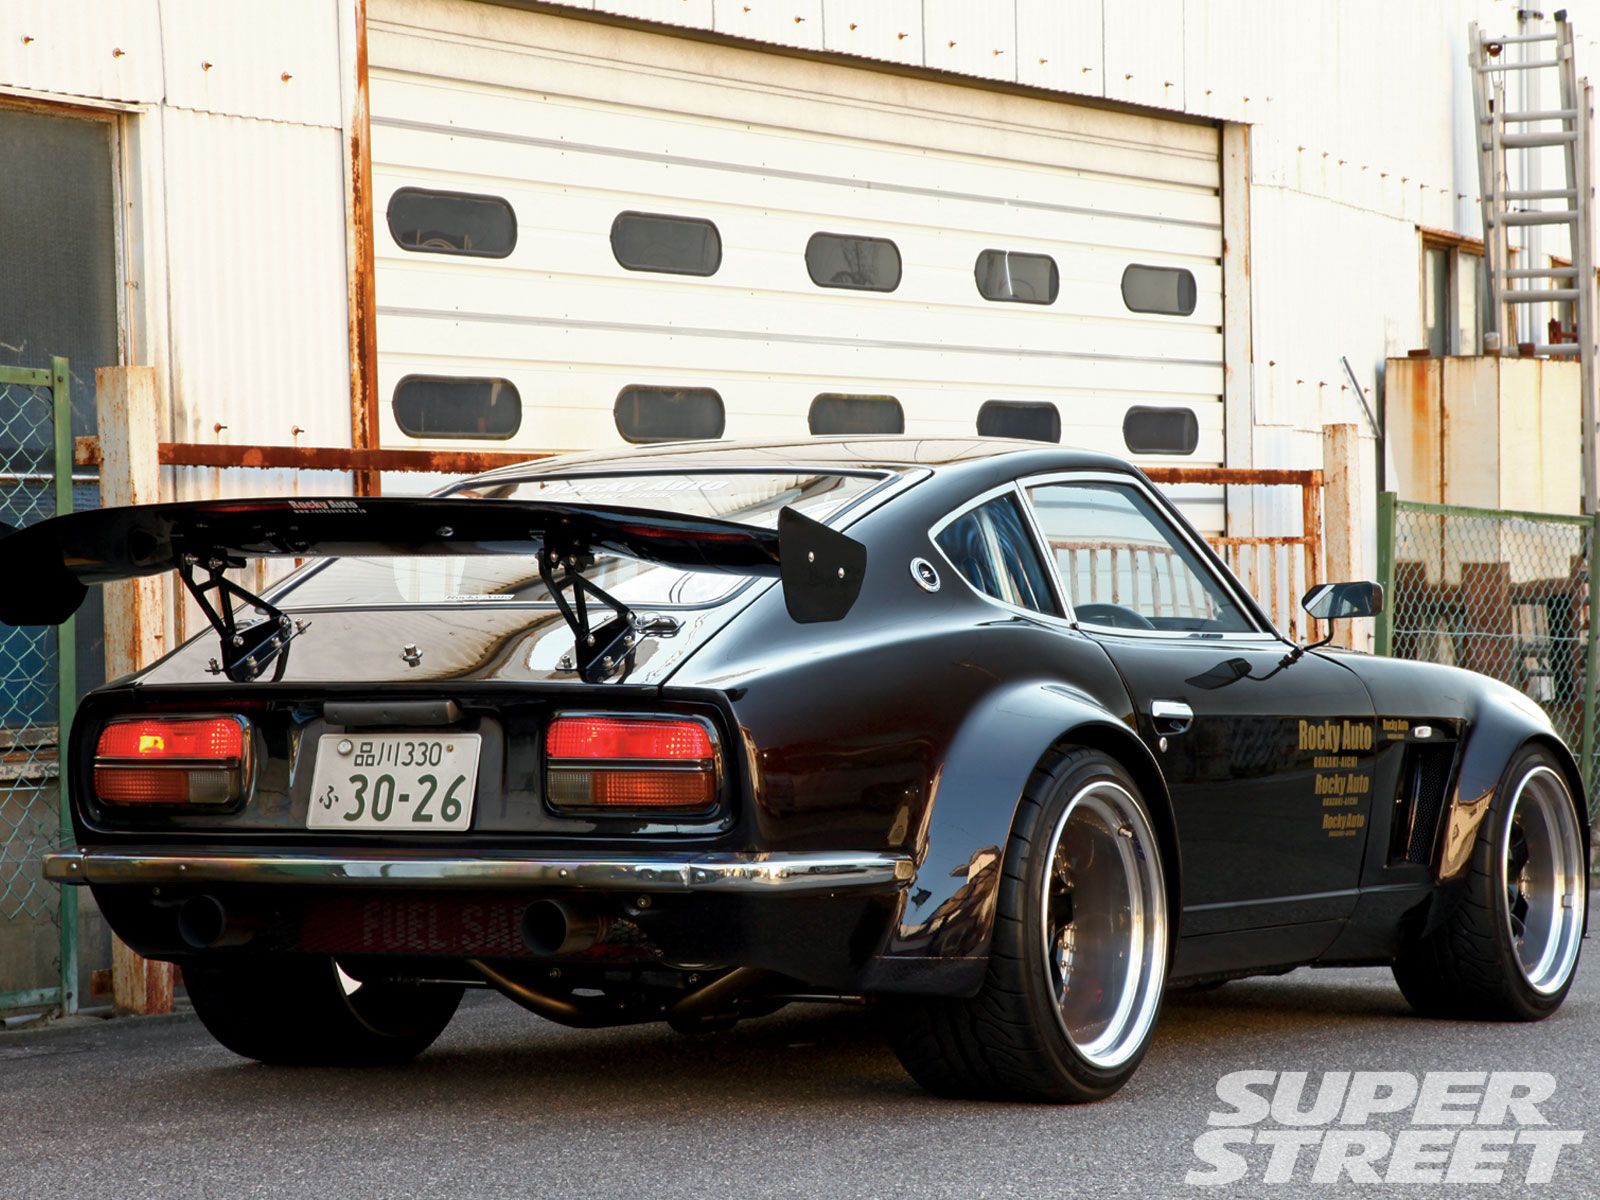 Nissan Fairlady Z I (S30) 1969 - 1978 Coupe :: OUTSTANDING CARS